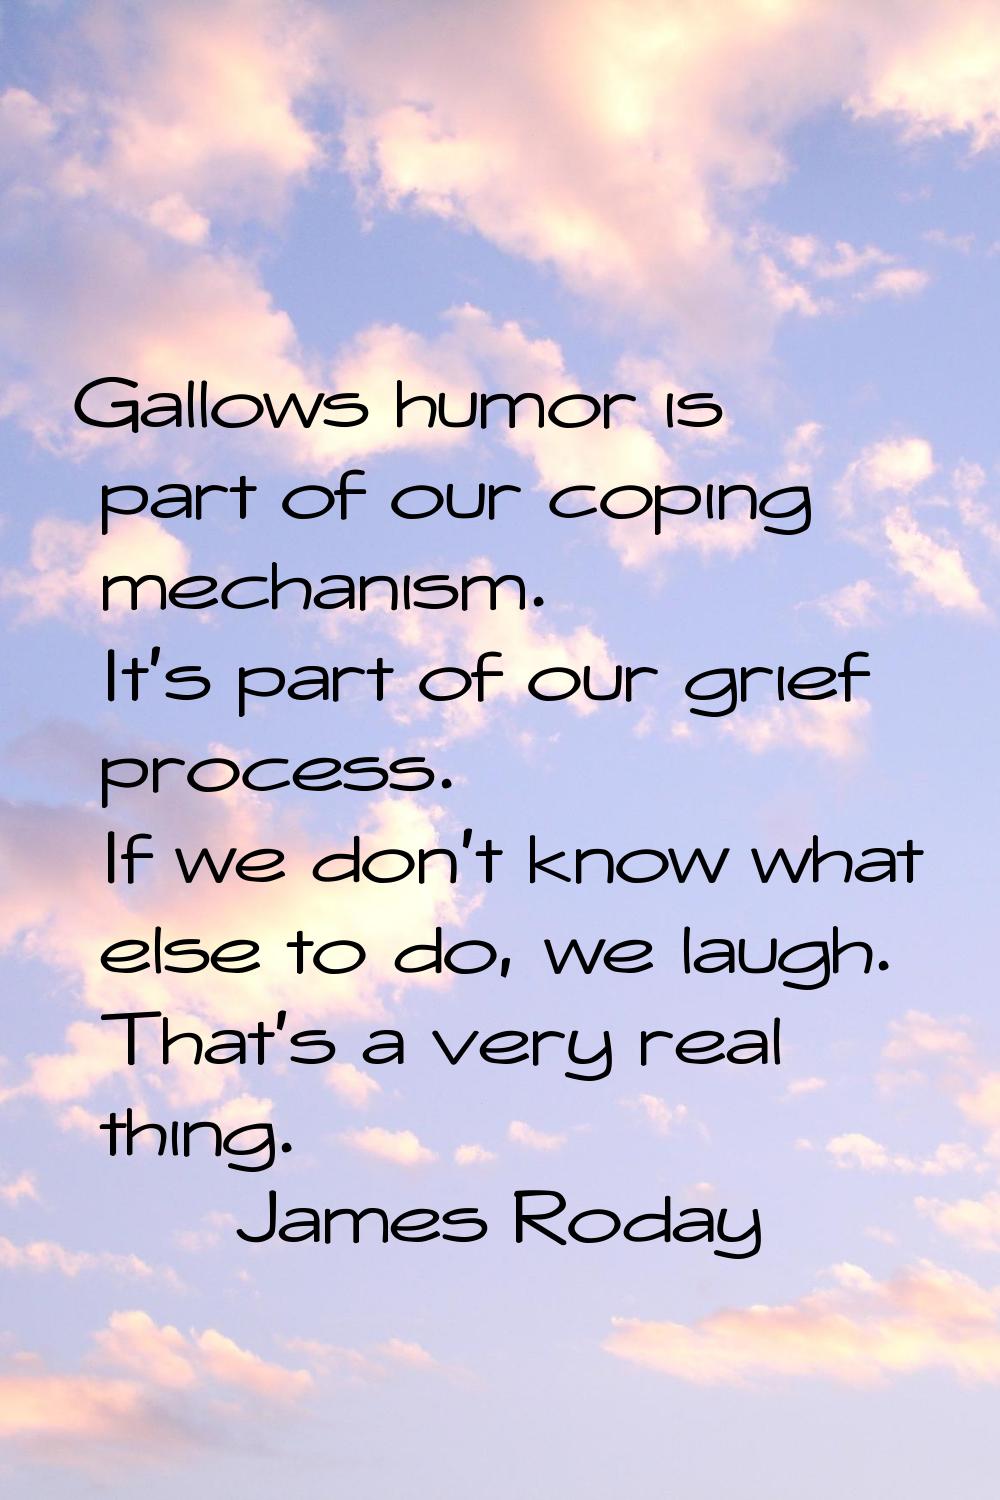 Gallows humor is part of our coping mechanism. It's part of our grief process. If we don't know wha